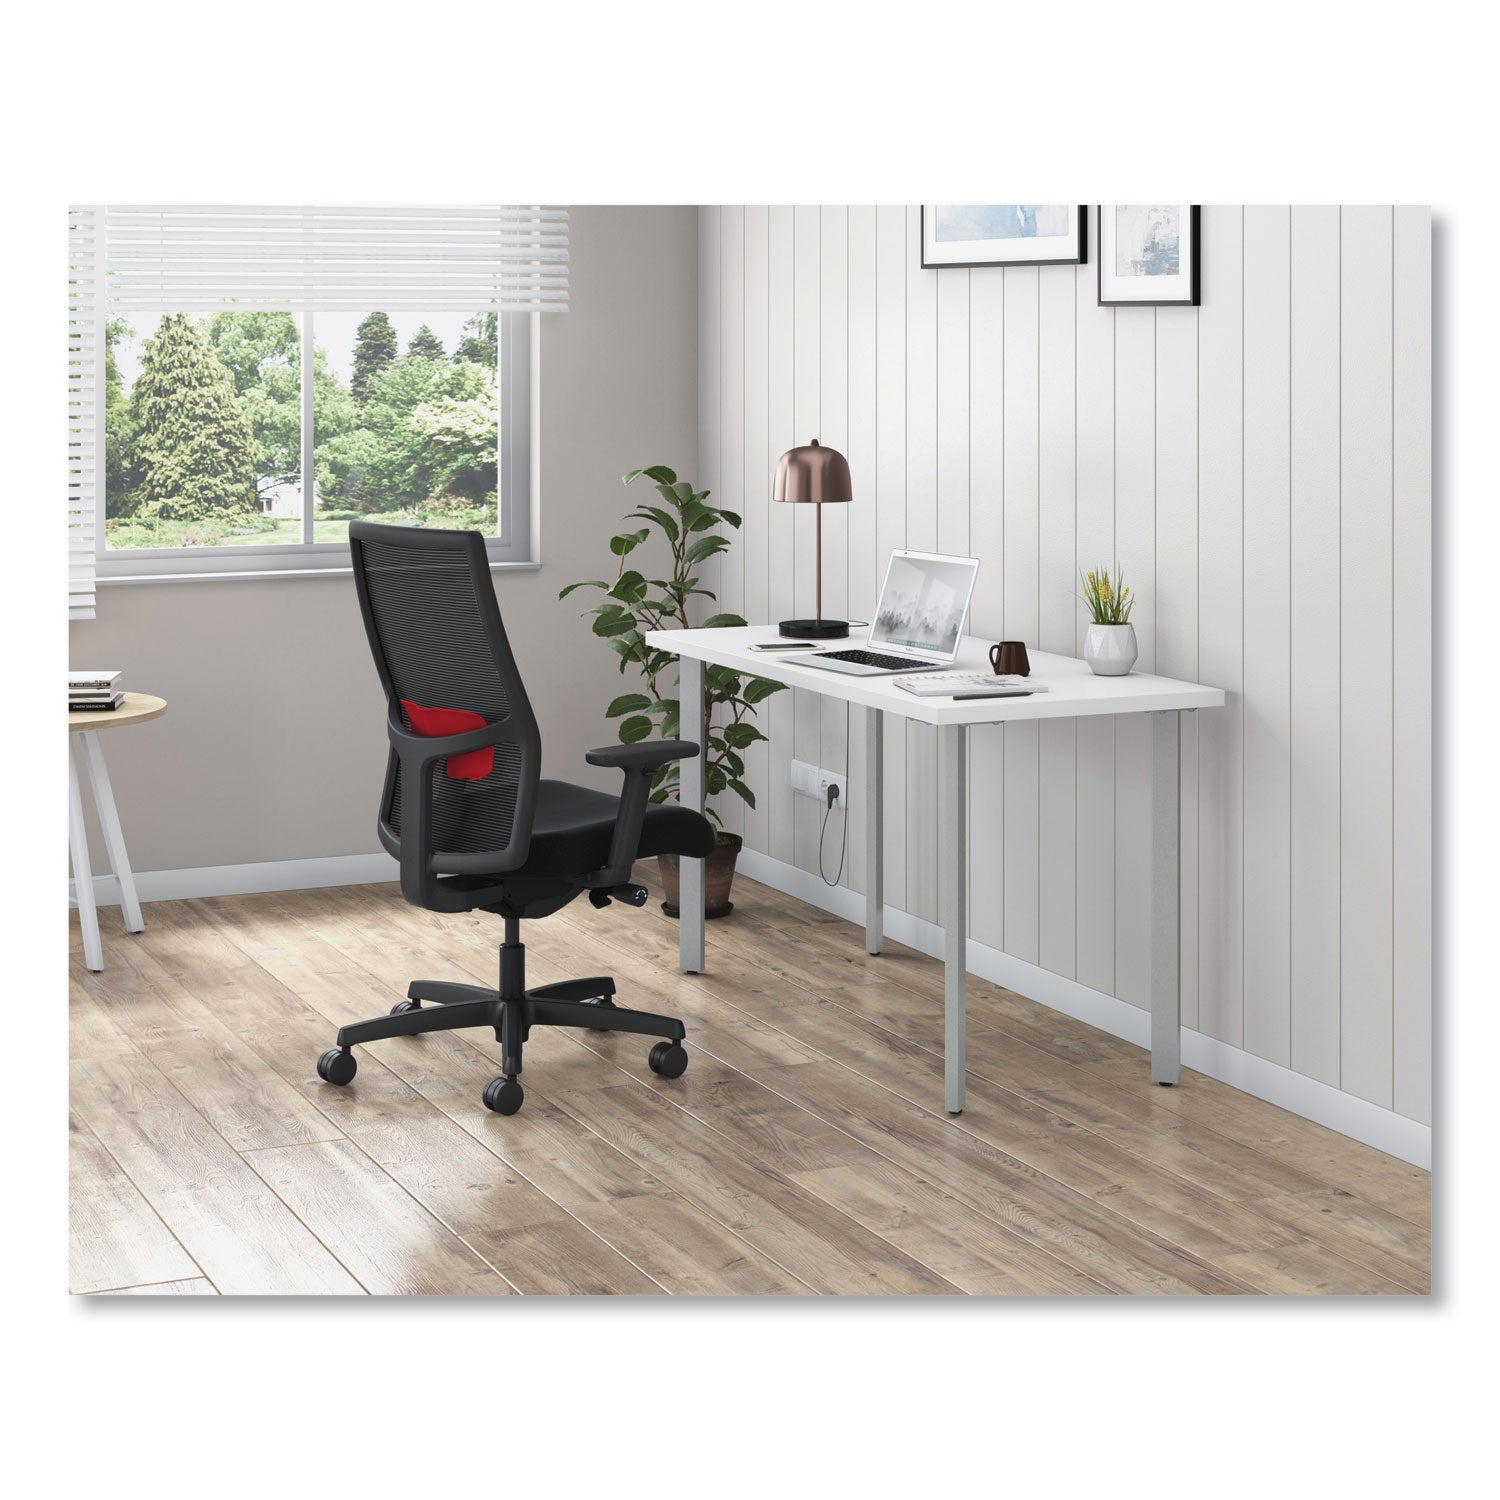 ignition-20-4-way-stretch-mid-back-mesh-task-chair-red-adjustable-lumbar-support-black-ships-in-7-10-business-days_honi2mm2amc10yt - 4